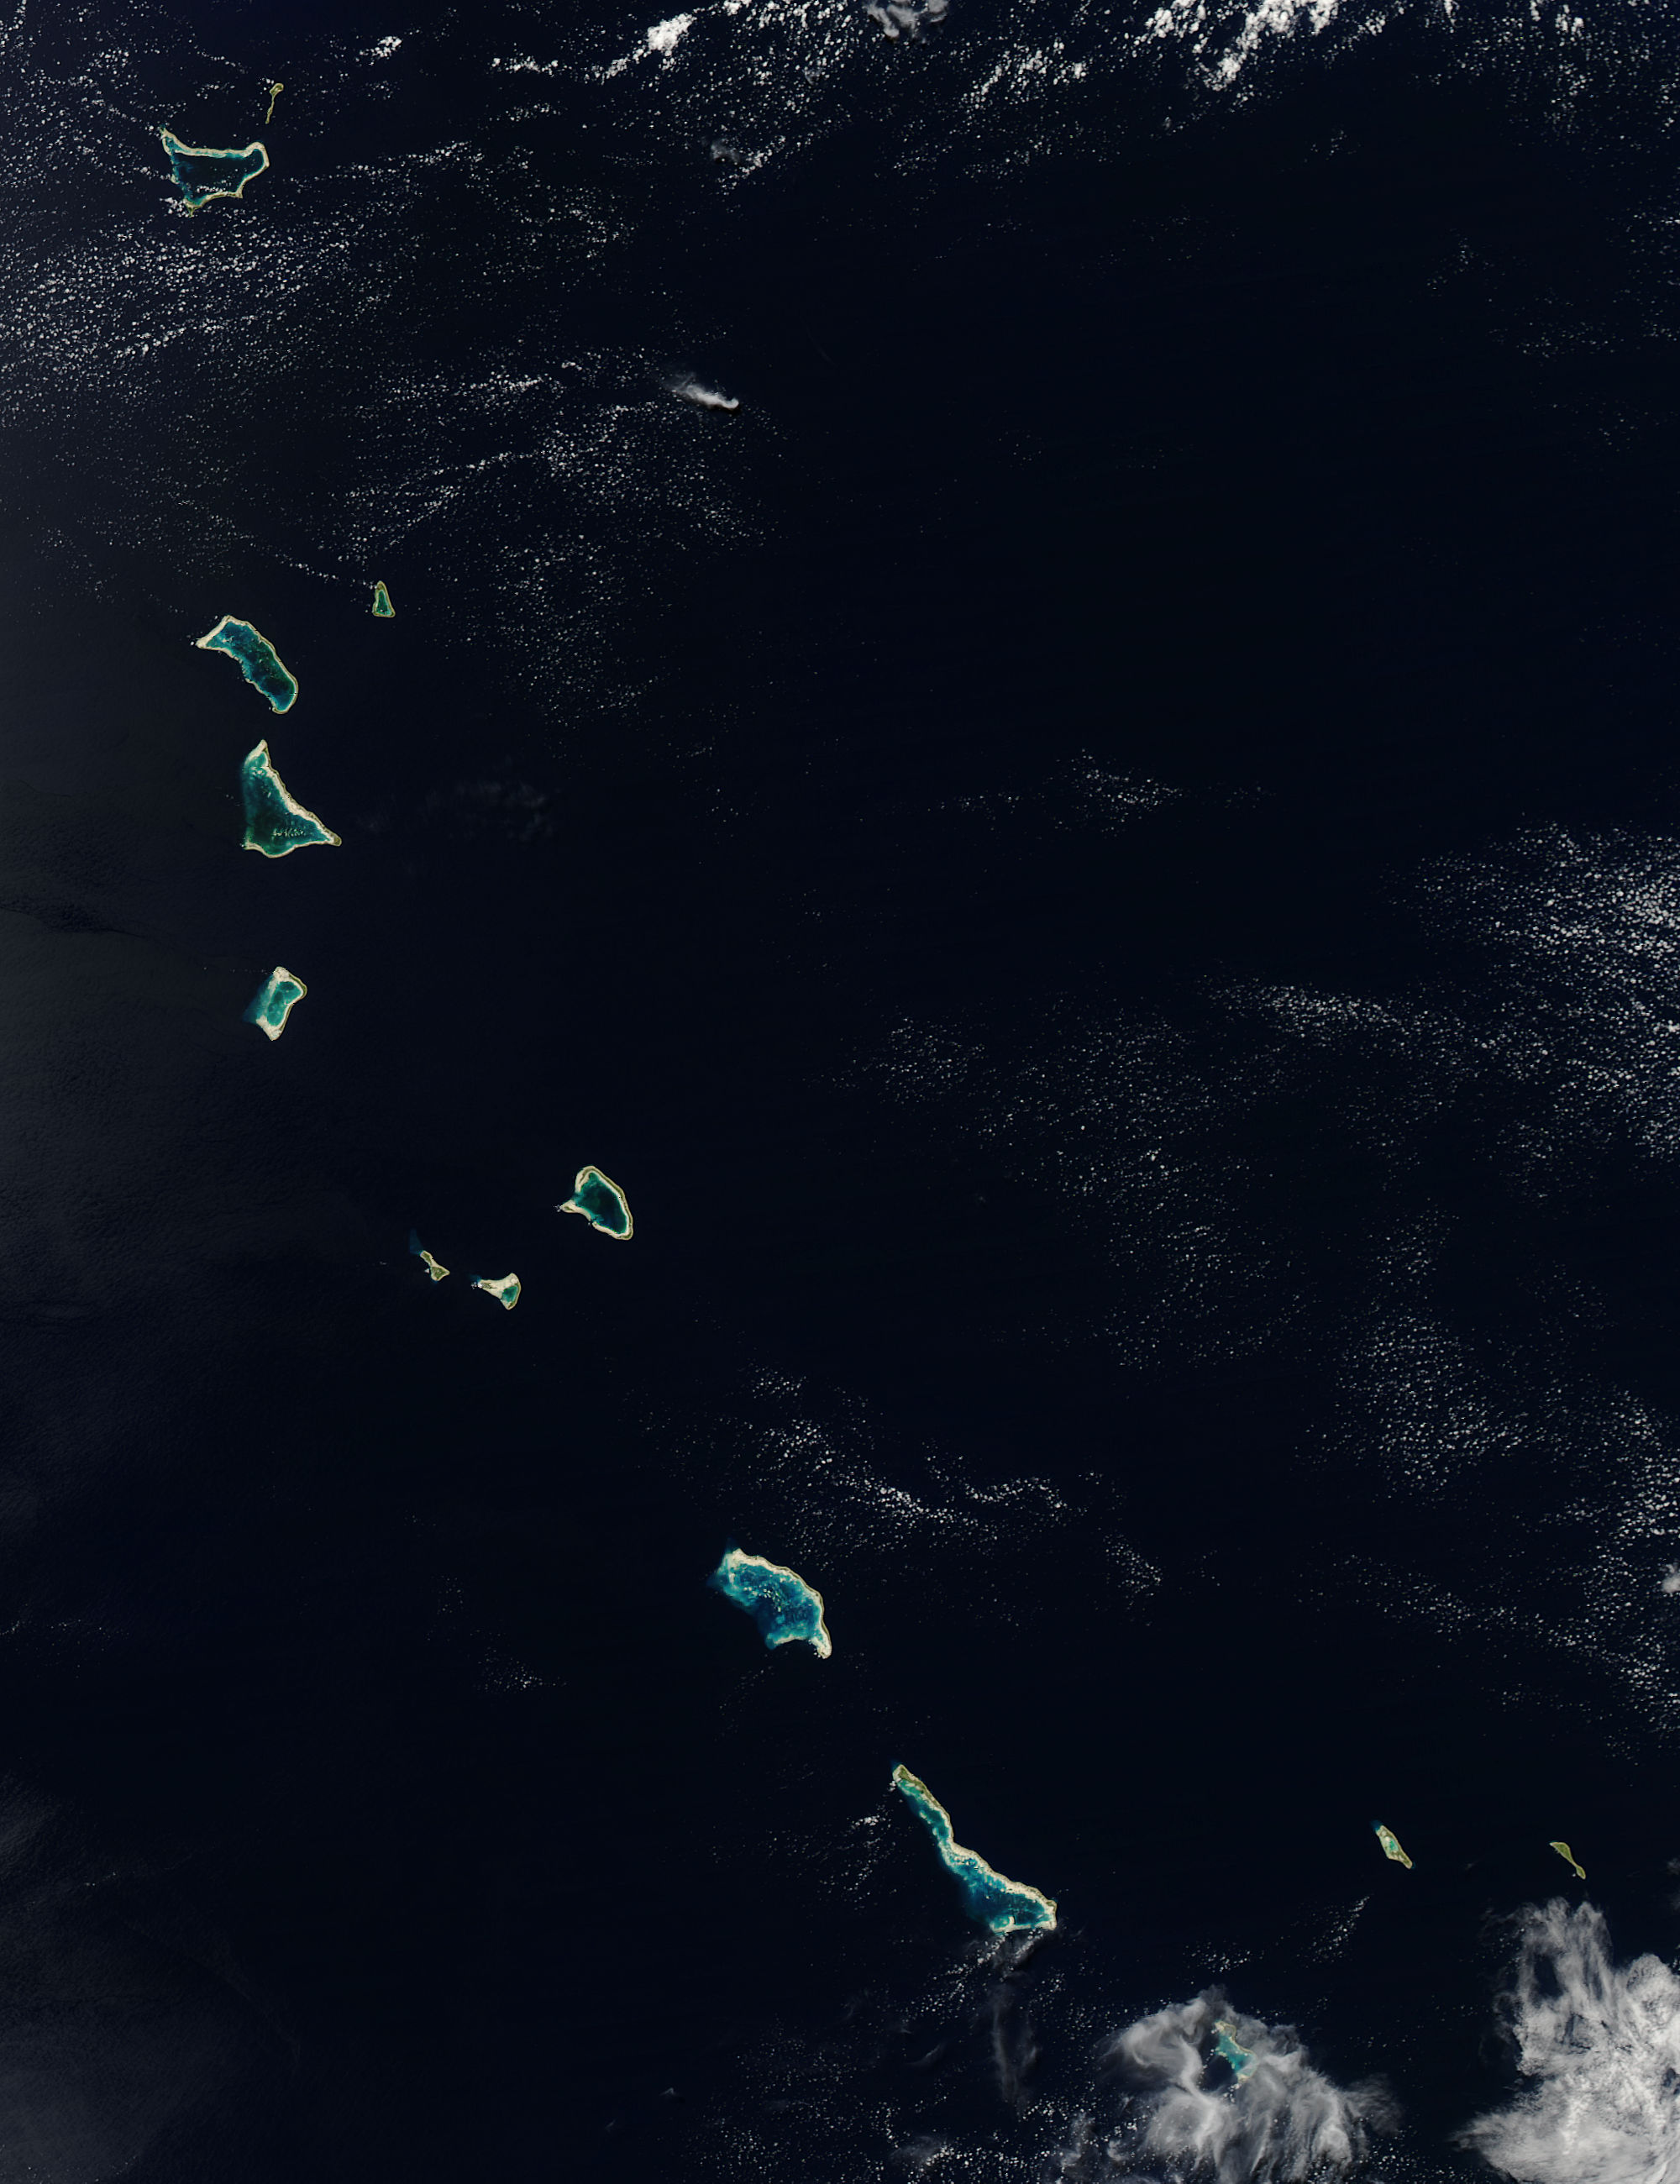 Gilbert Islands, central Pacific Ocean - related image preview